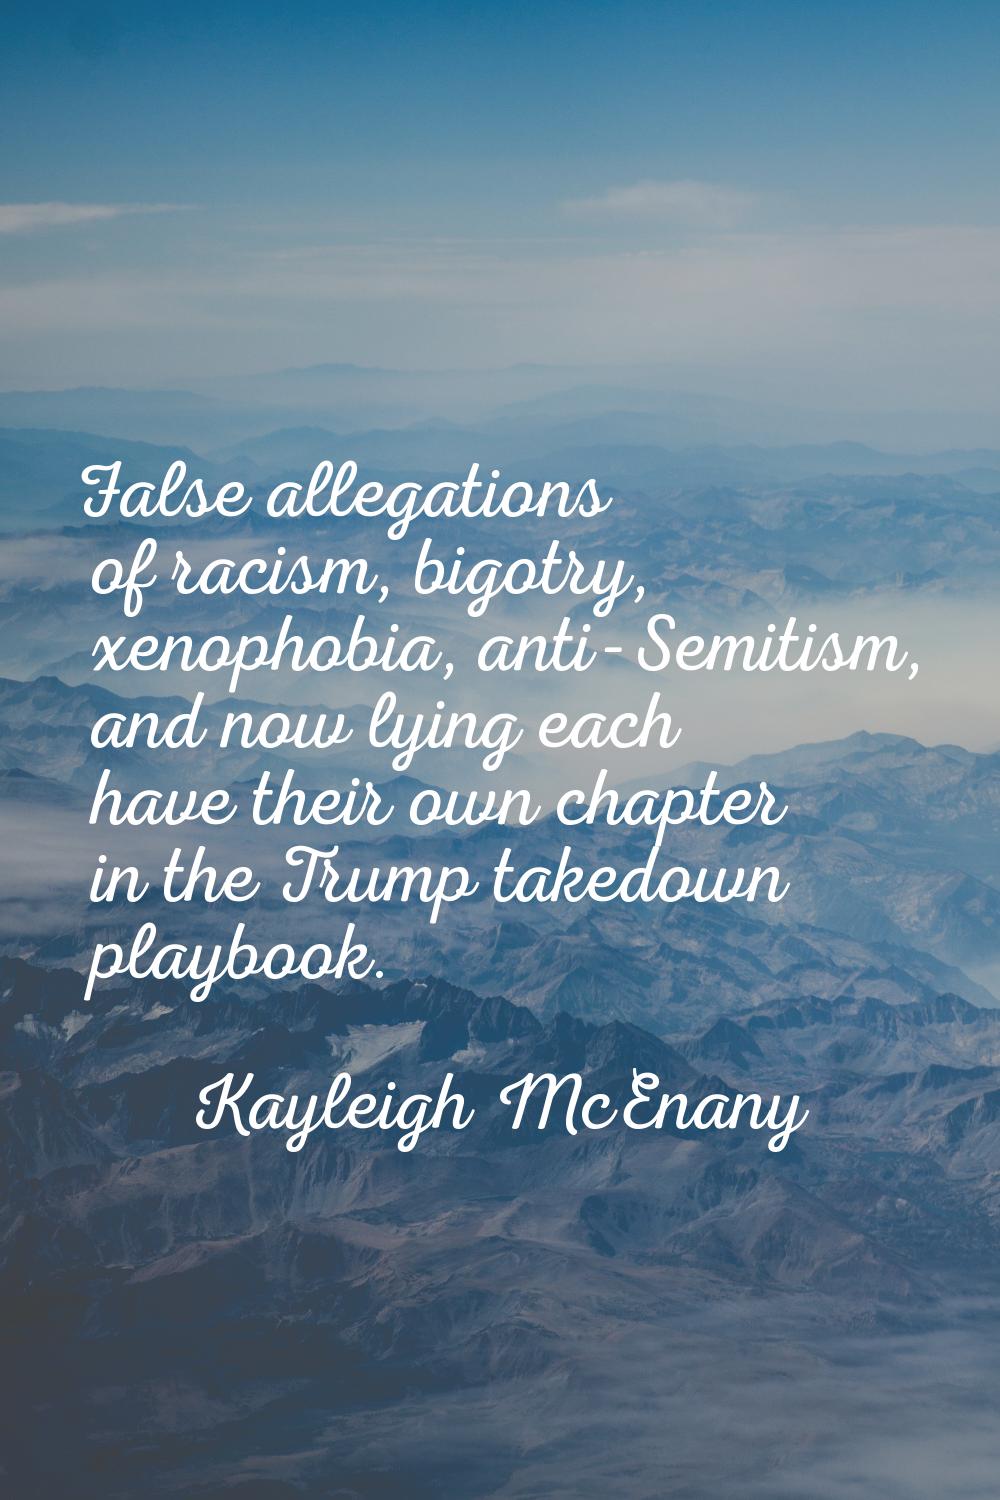 False allegations of racism, bigotry, xenophobia, anti-Semitism, and now lying each have their own 